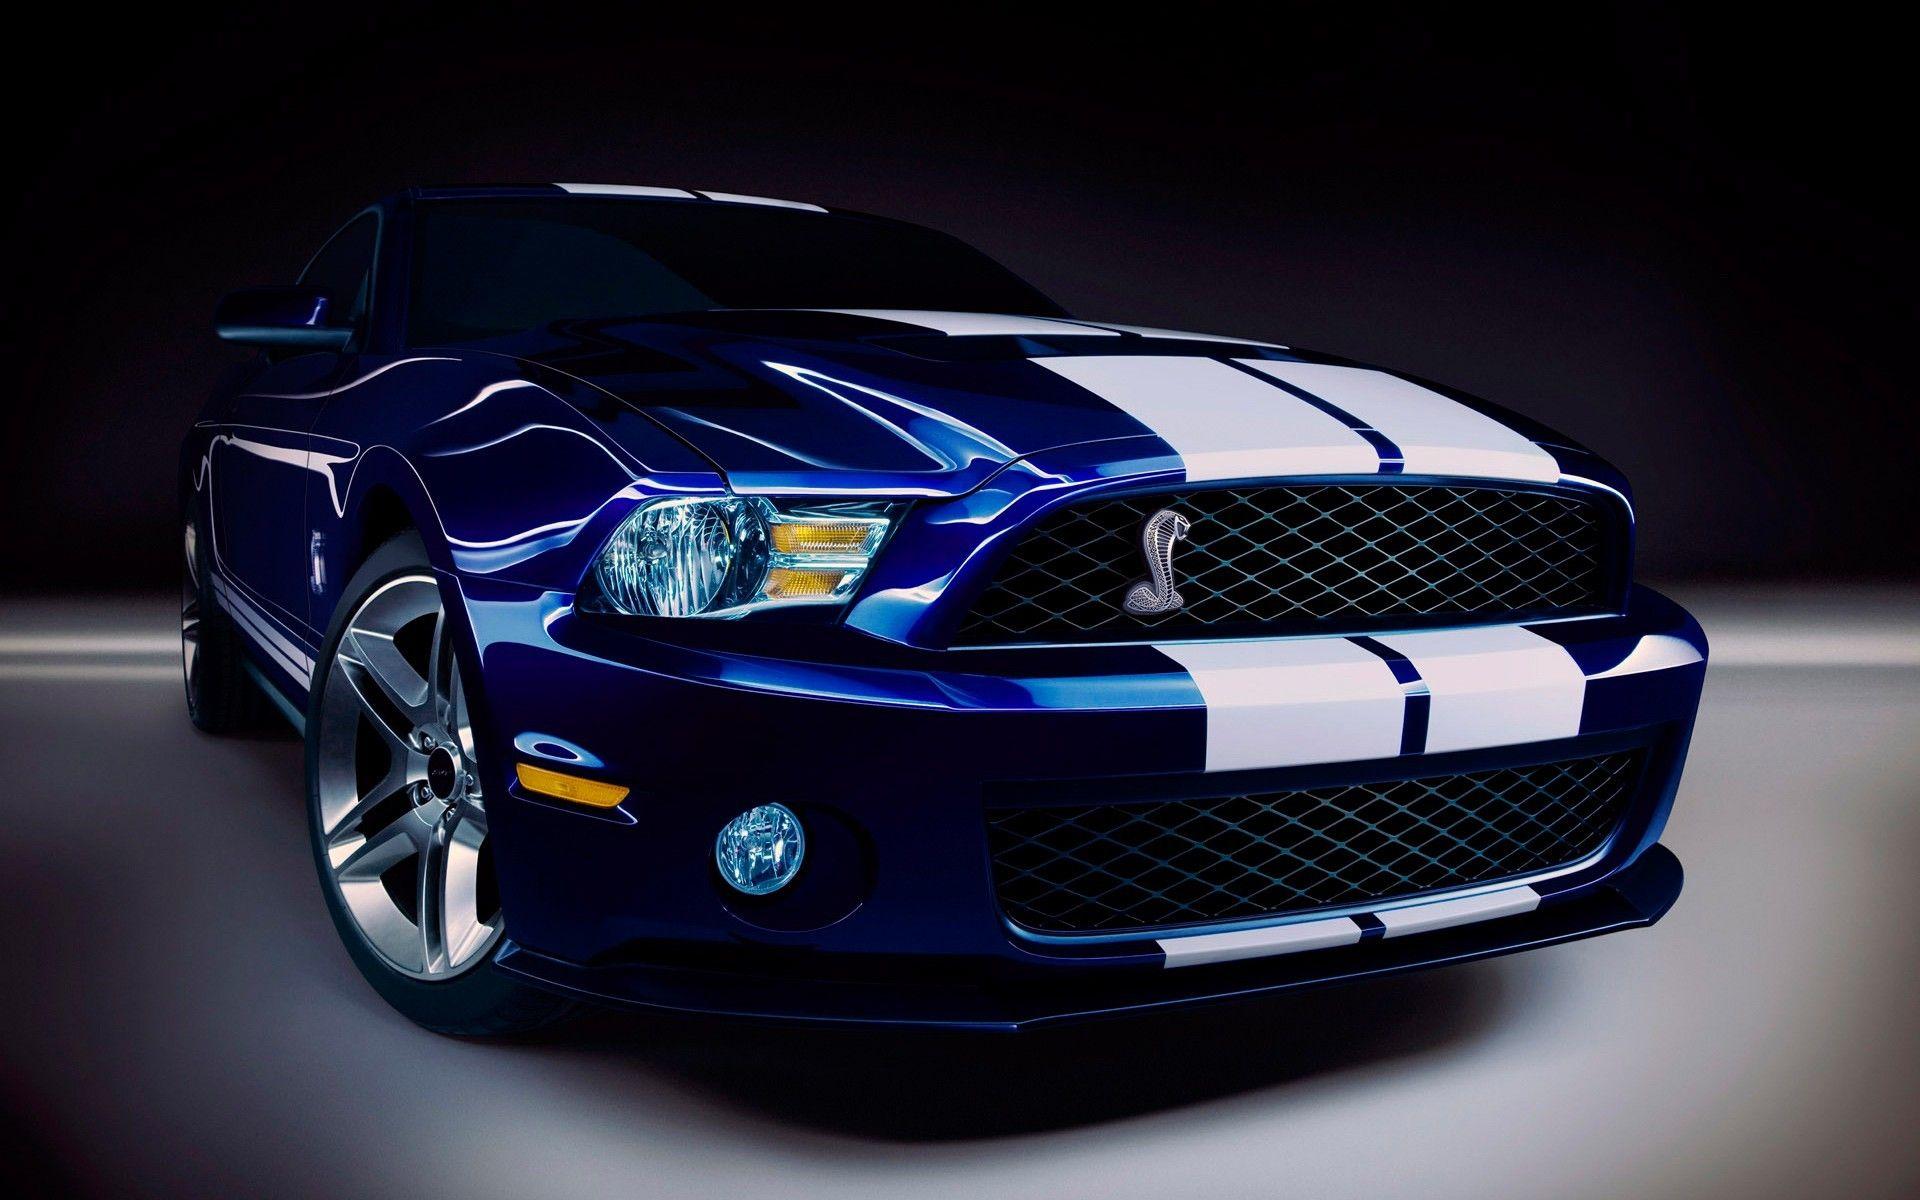 Mustang shelby gt500 wallpaper. PC